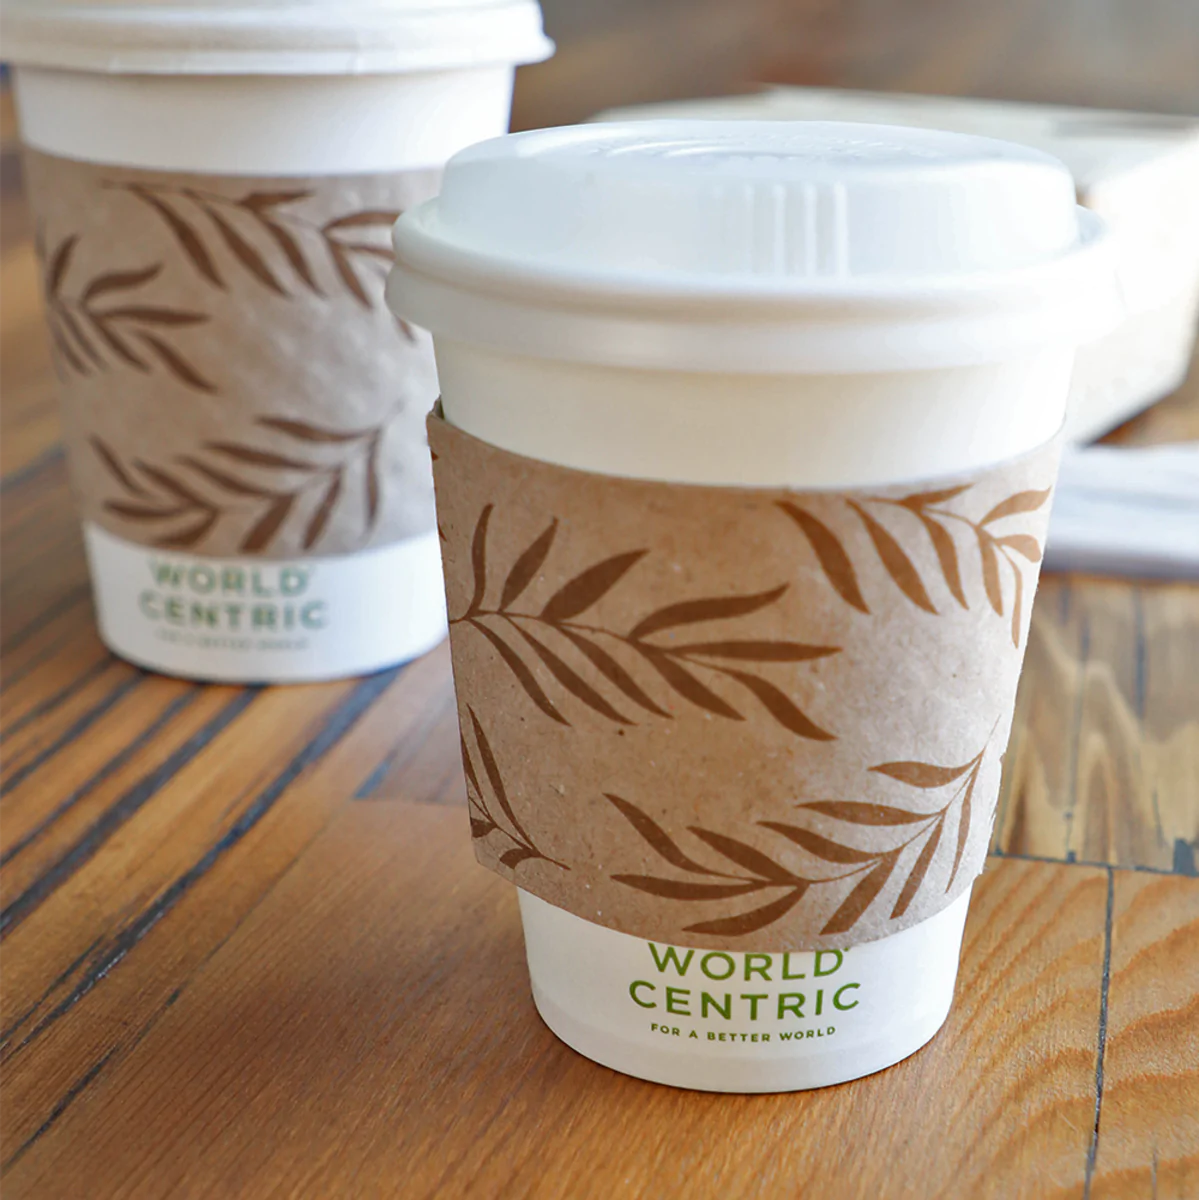 Coffee Cup Sleeve Reusable-Compostable Cover-Go-Compost